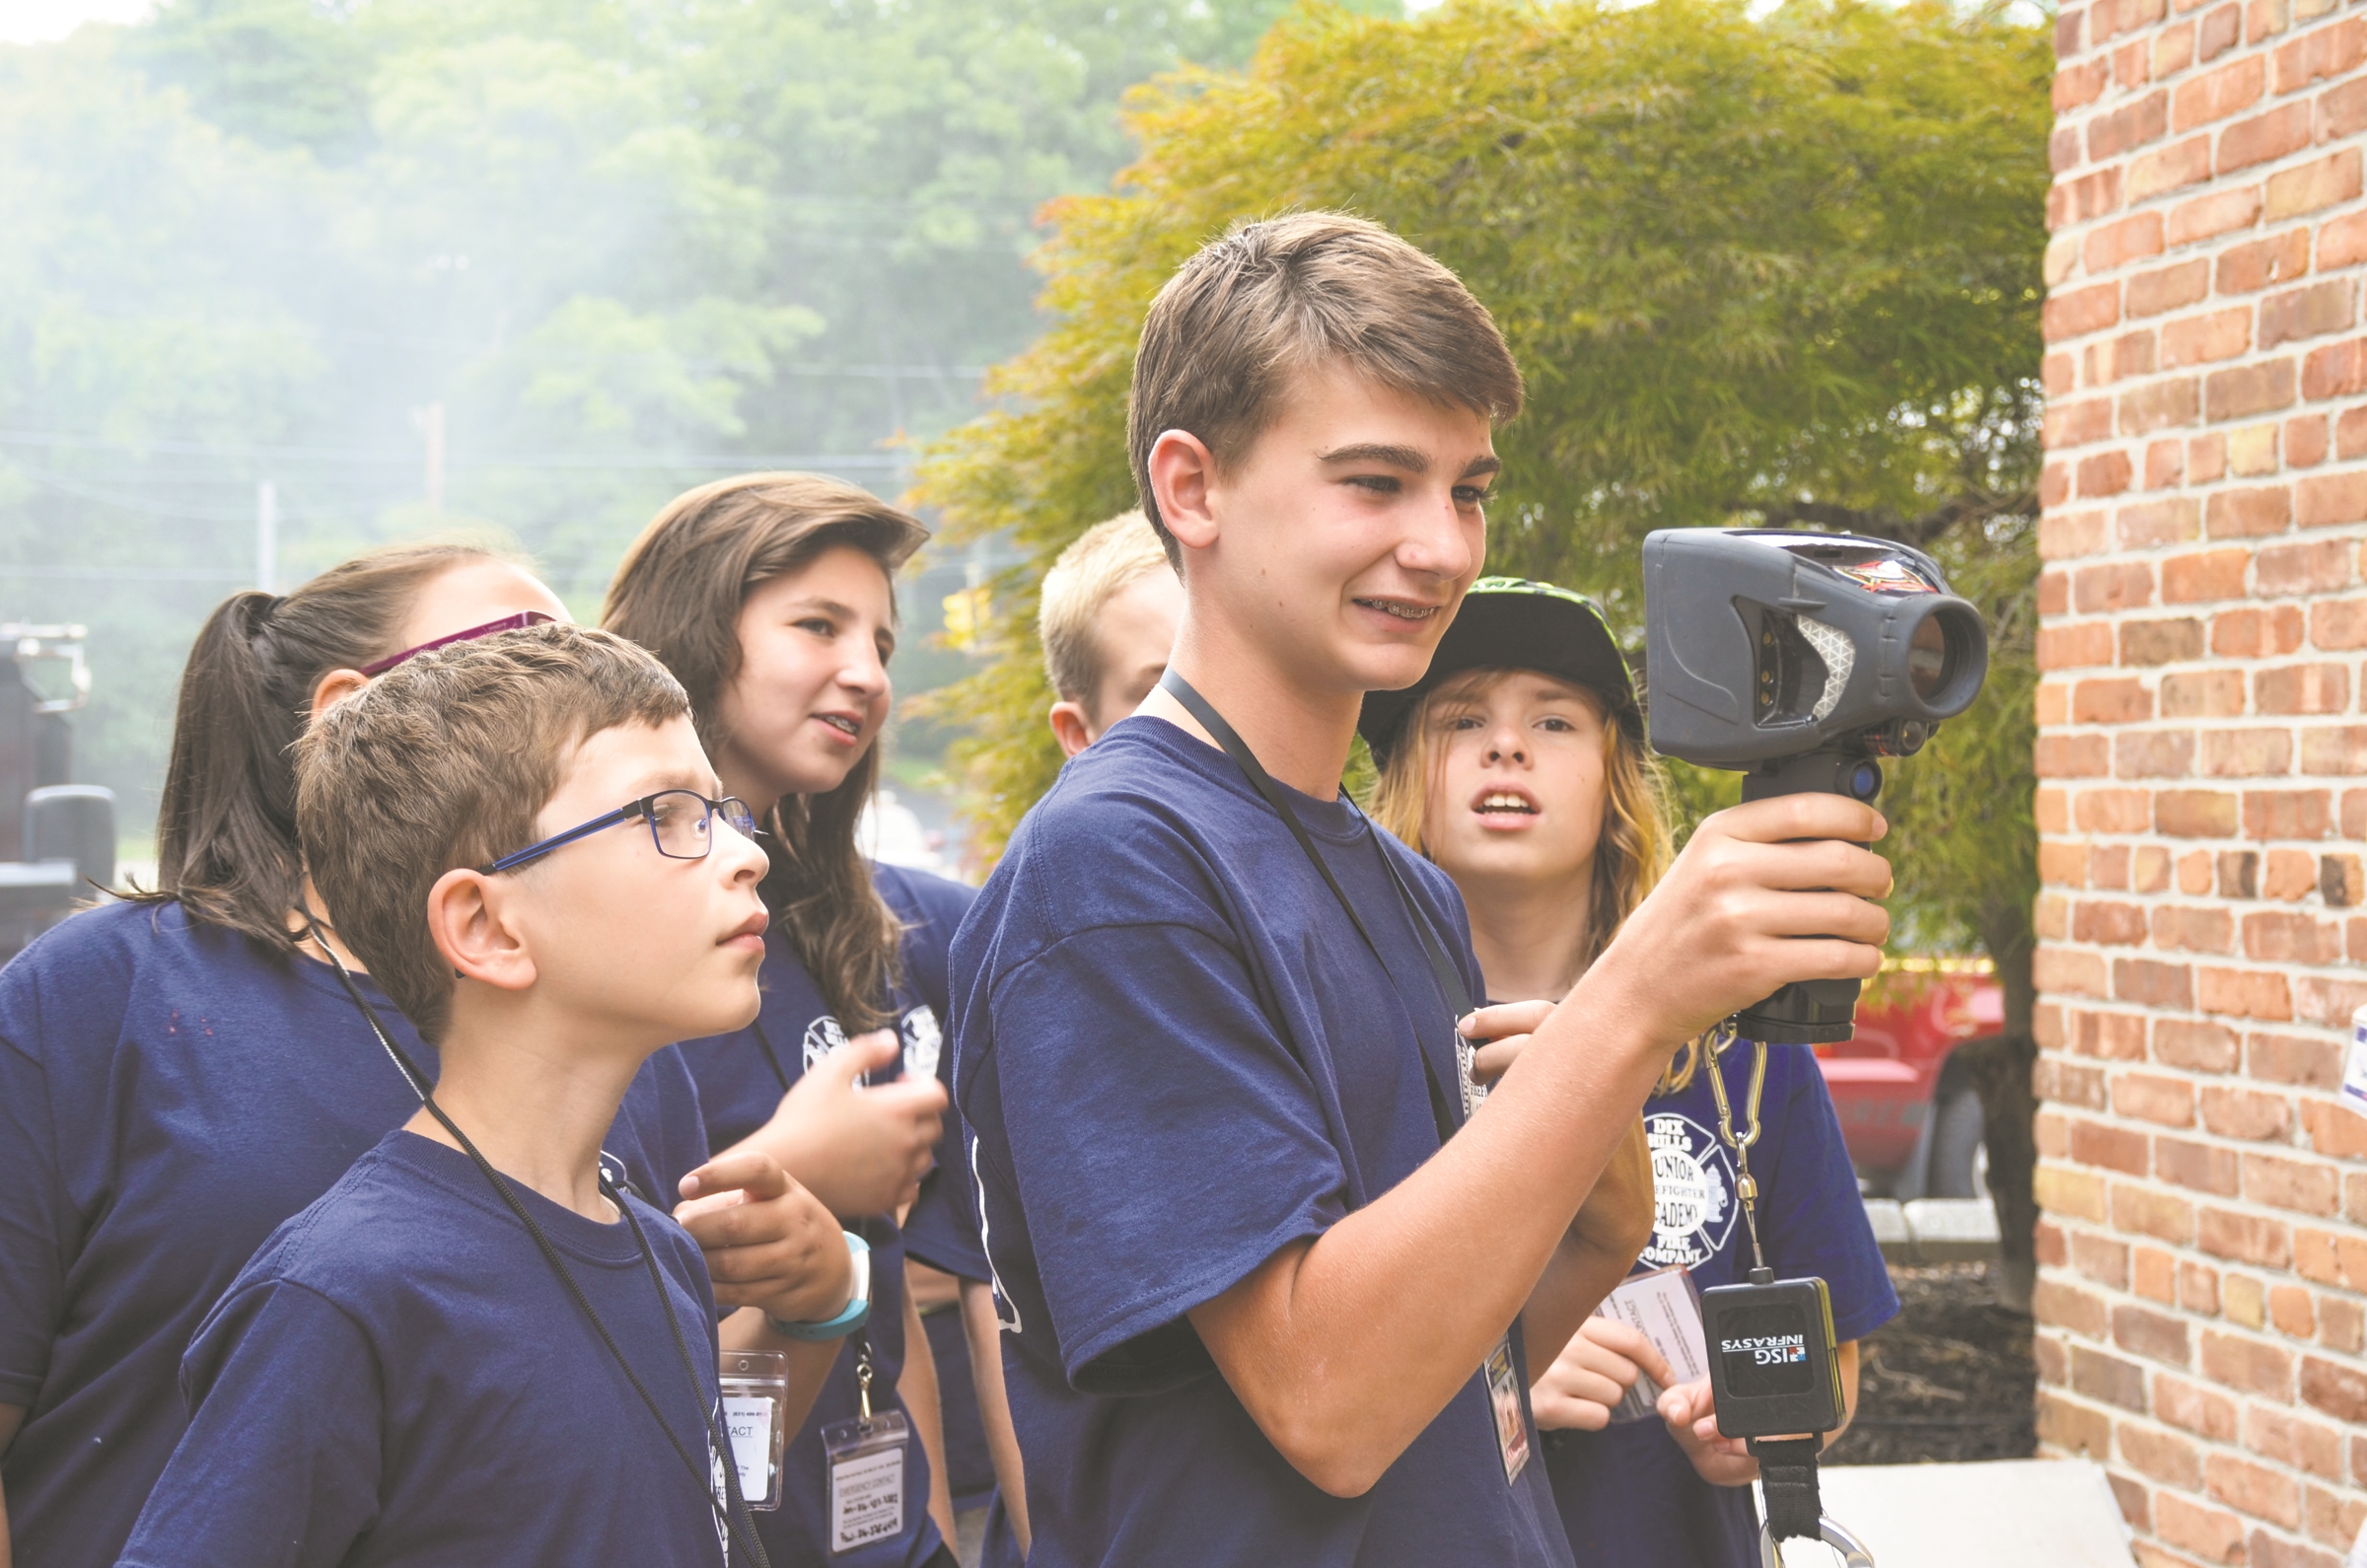   Kids practice using a Thermal Imaging Camera that allows firefighters to see areas of heat and locate victims through heavy smoke.&nbsp;  Photo by Rachel Sarah Berkowitz  